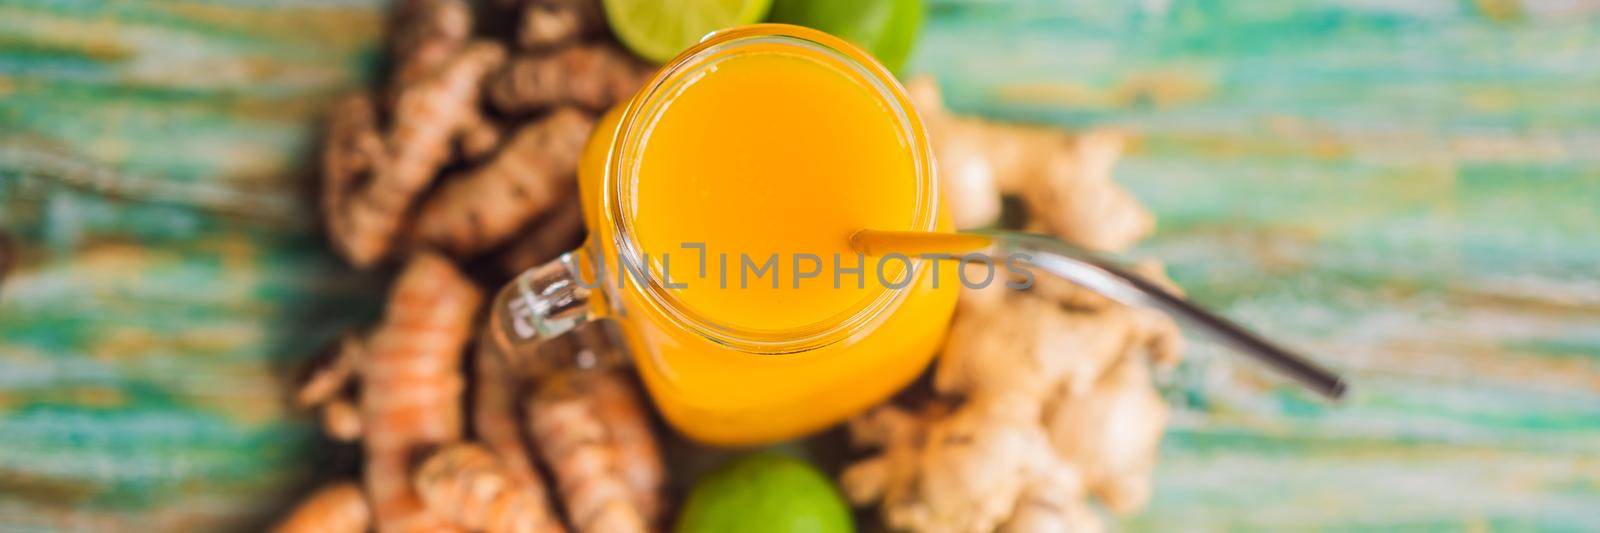 Drink Jamu. Indonesian traditional drink in bali. BANNER, LONG FORMAT